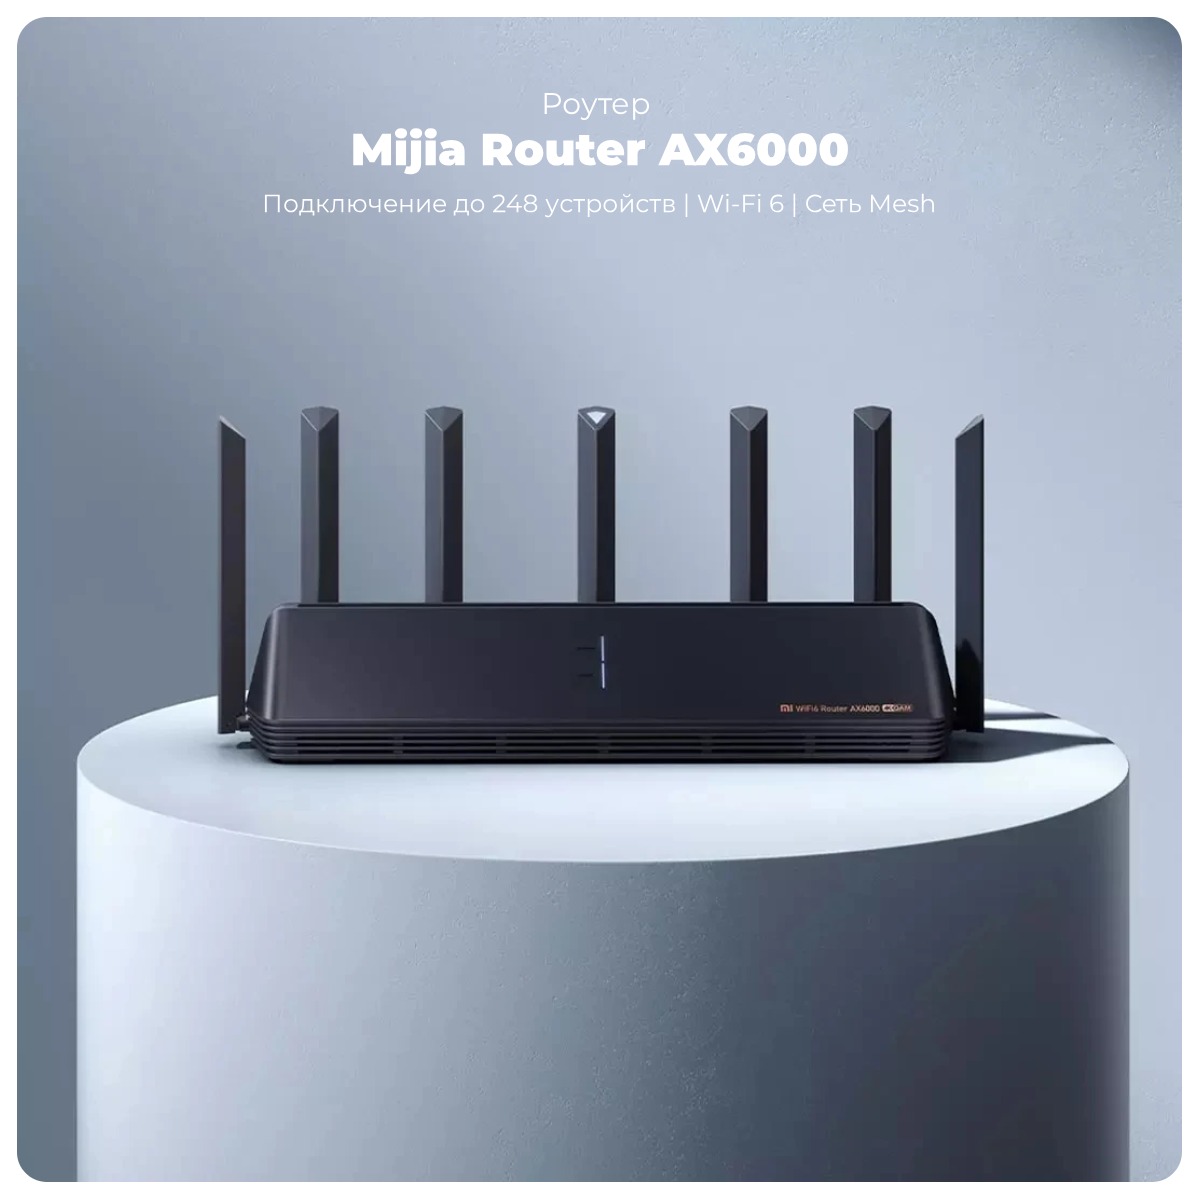 Mijia-Router-AX6000-01